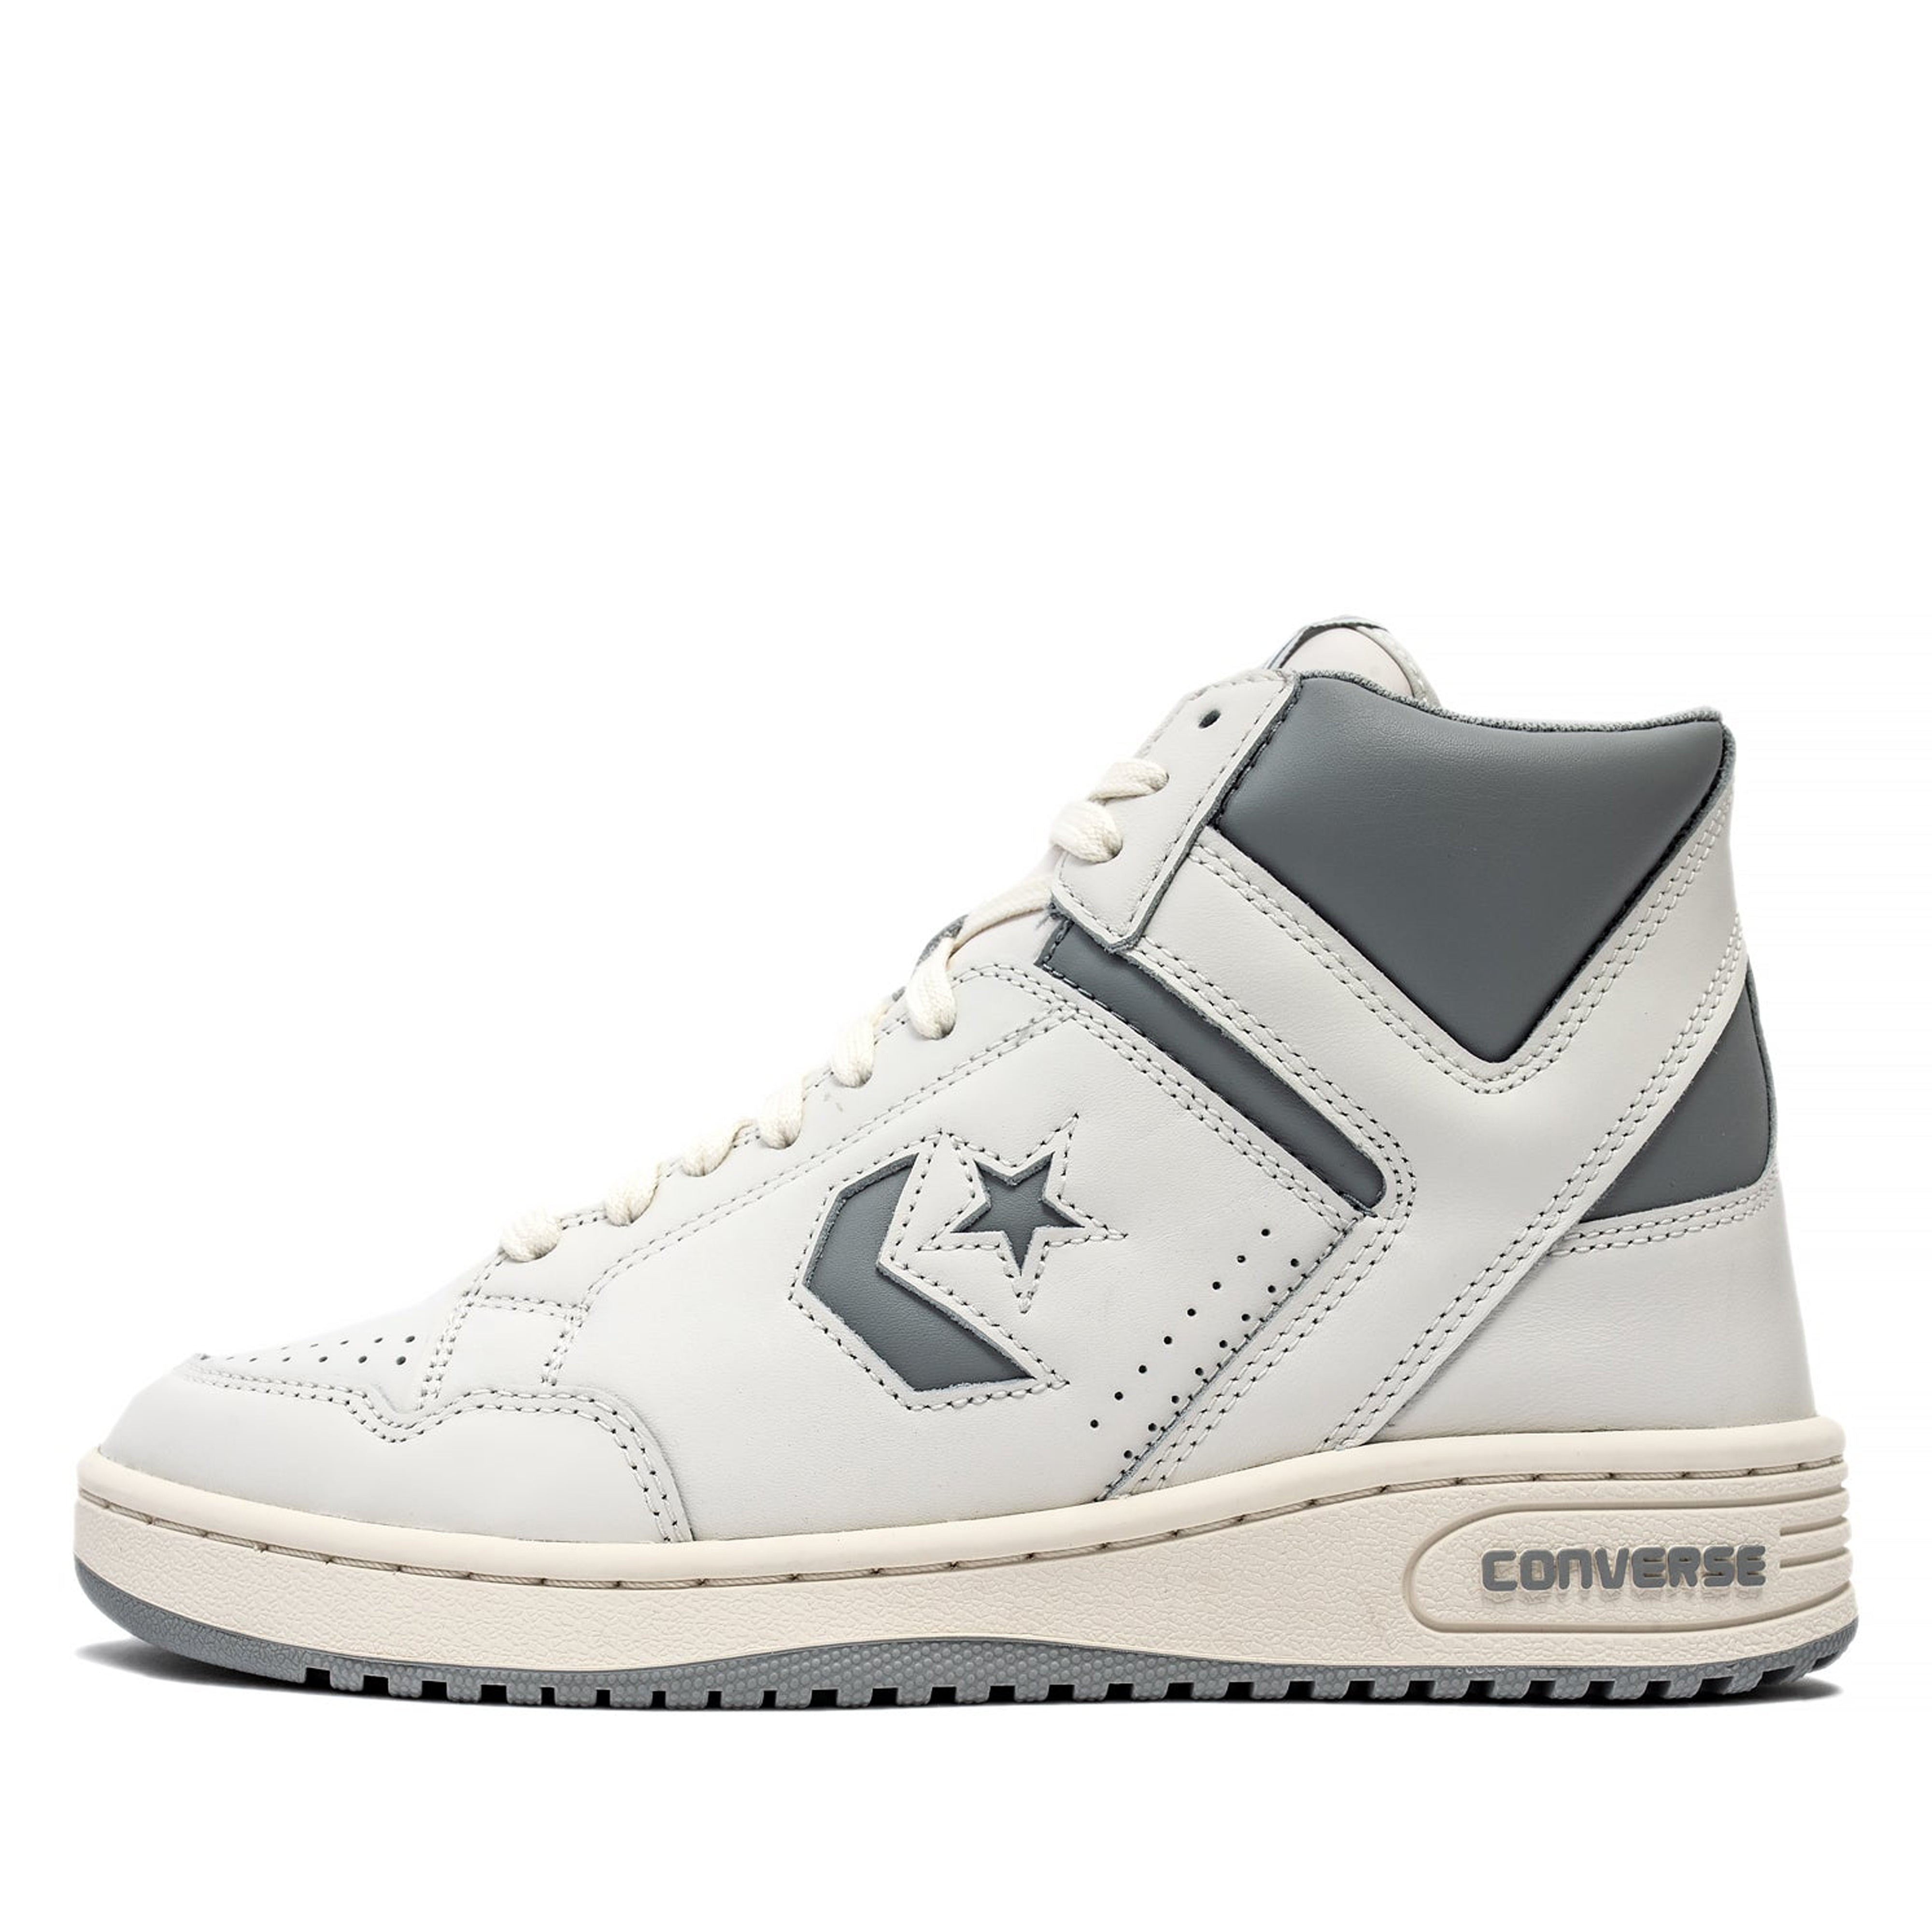 Converse - Weapon High Sneakers - (White/Grey)